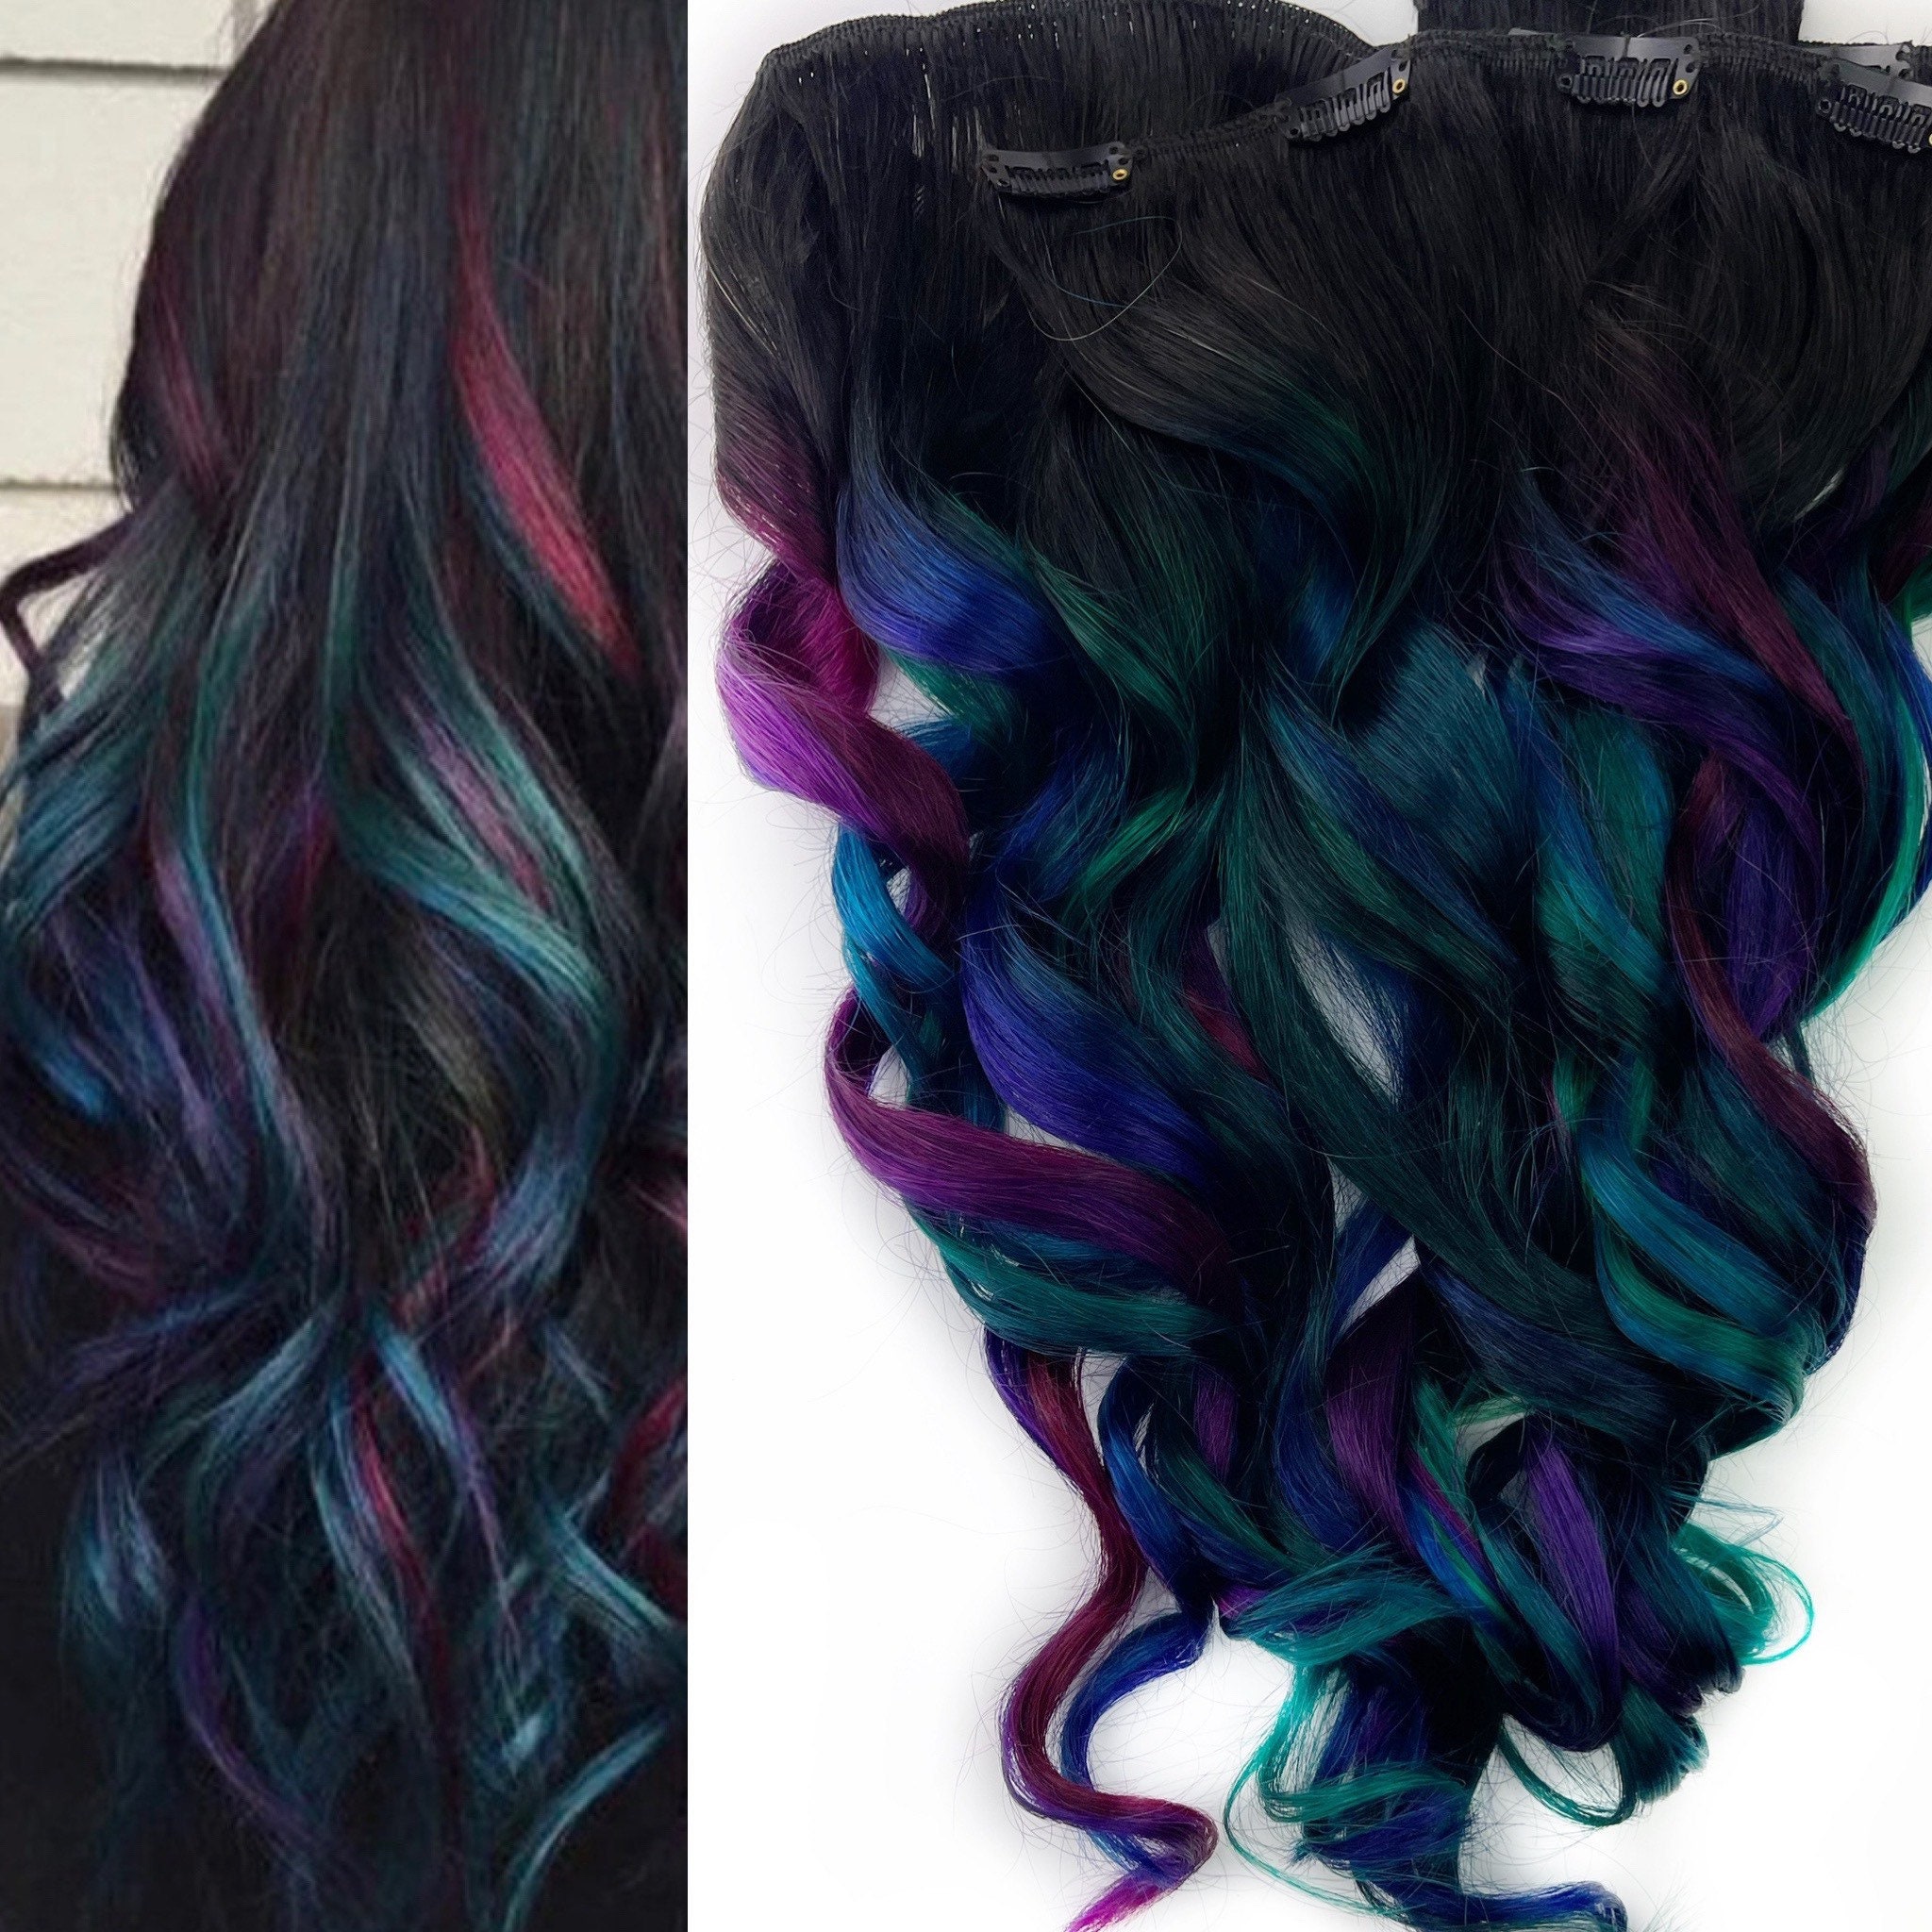 Oil Slick Is The Colourful New Hair Trend For Brunettes  Glamour UK